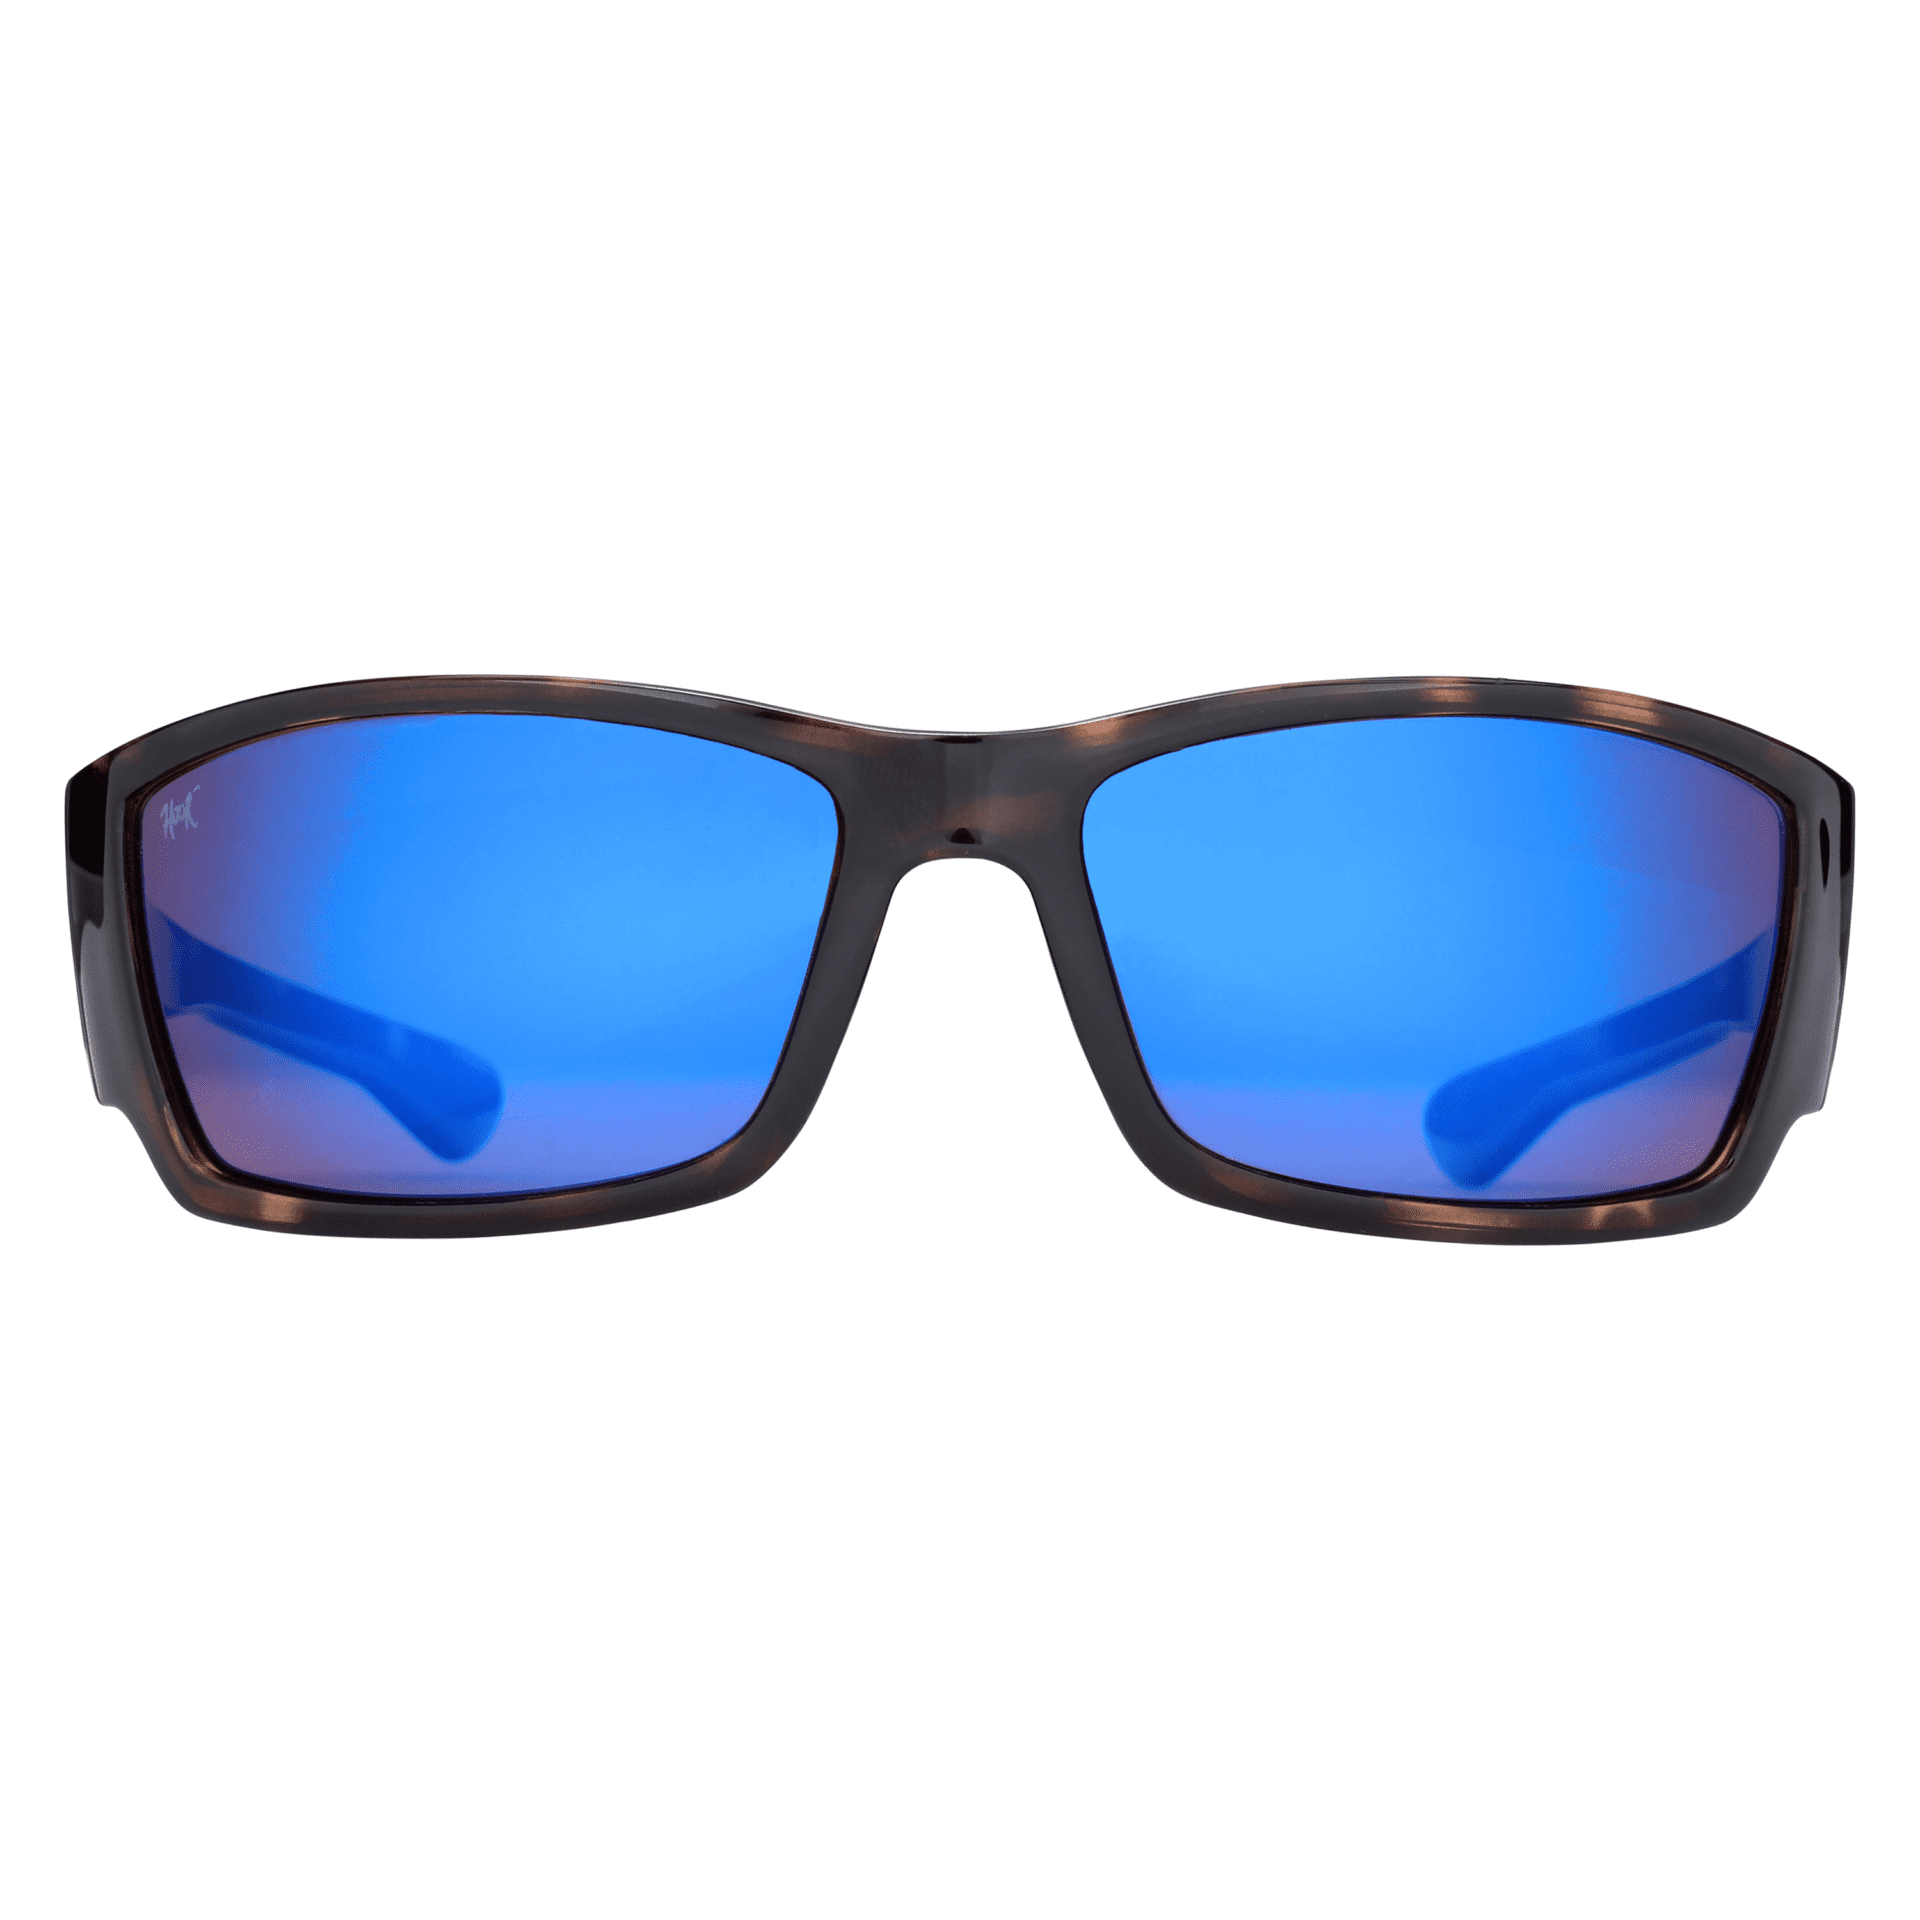 Sunglasses Yellowfin Great fit for Medium Faces Optimum Protection from the sun